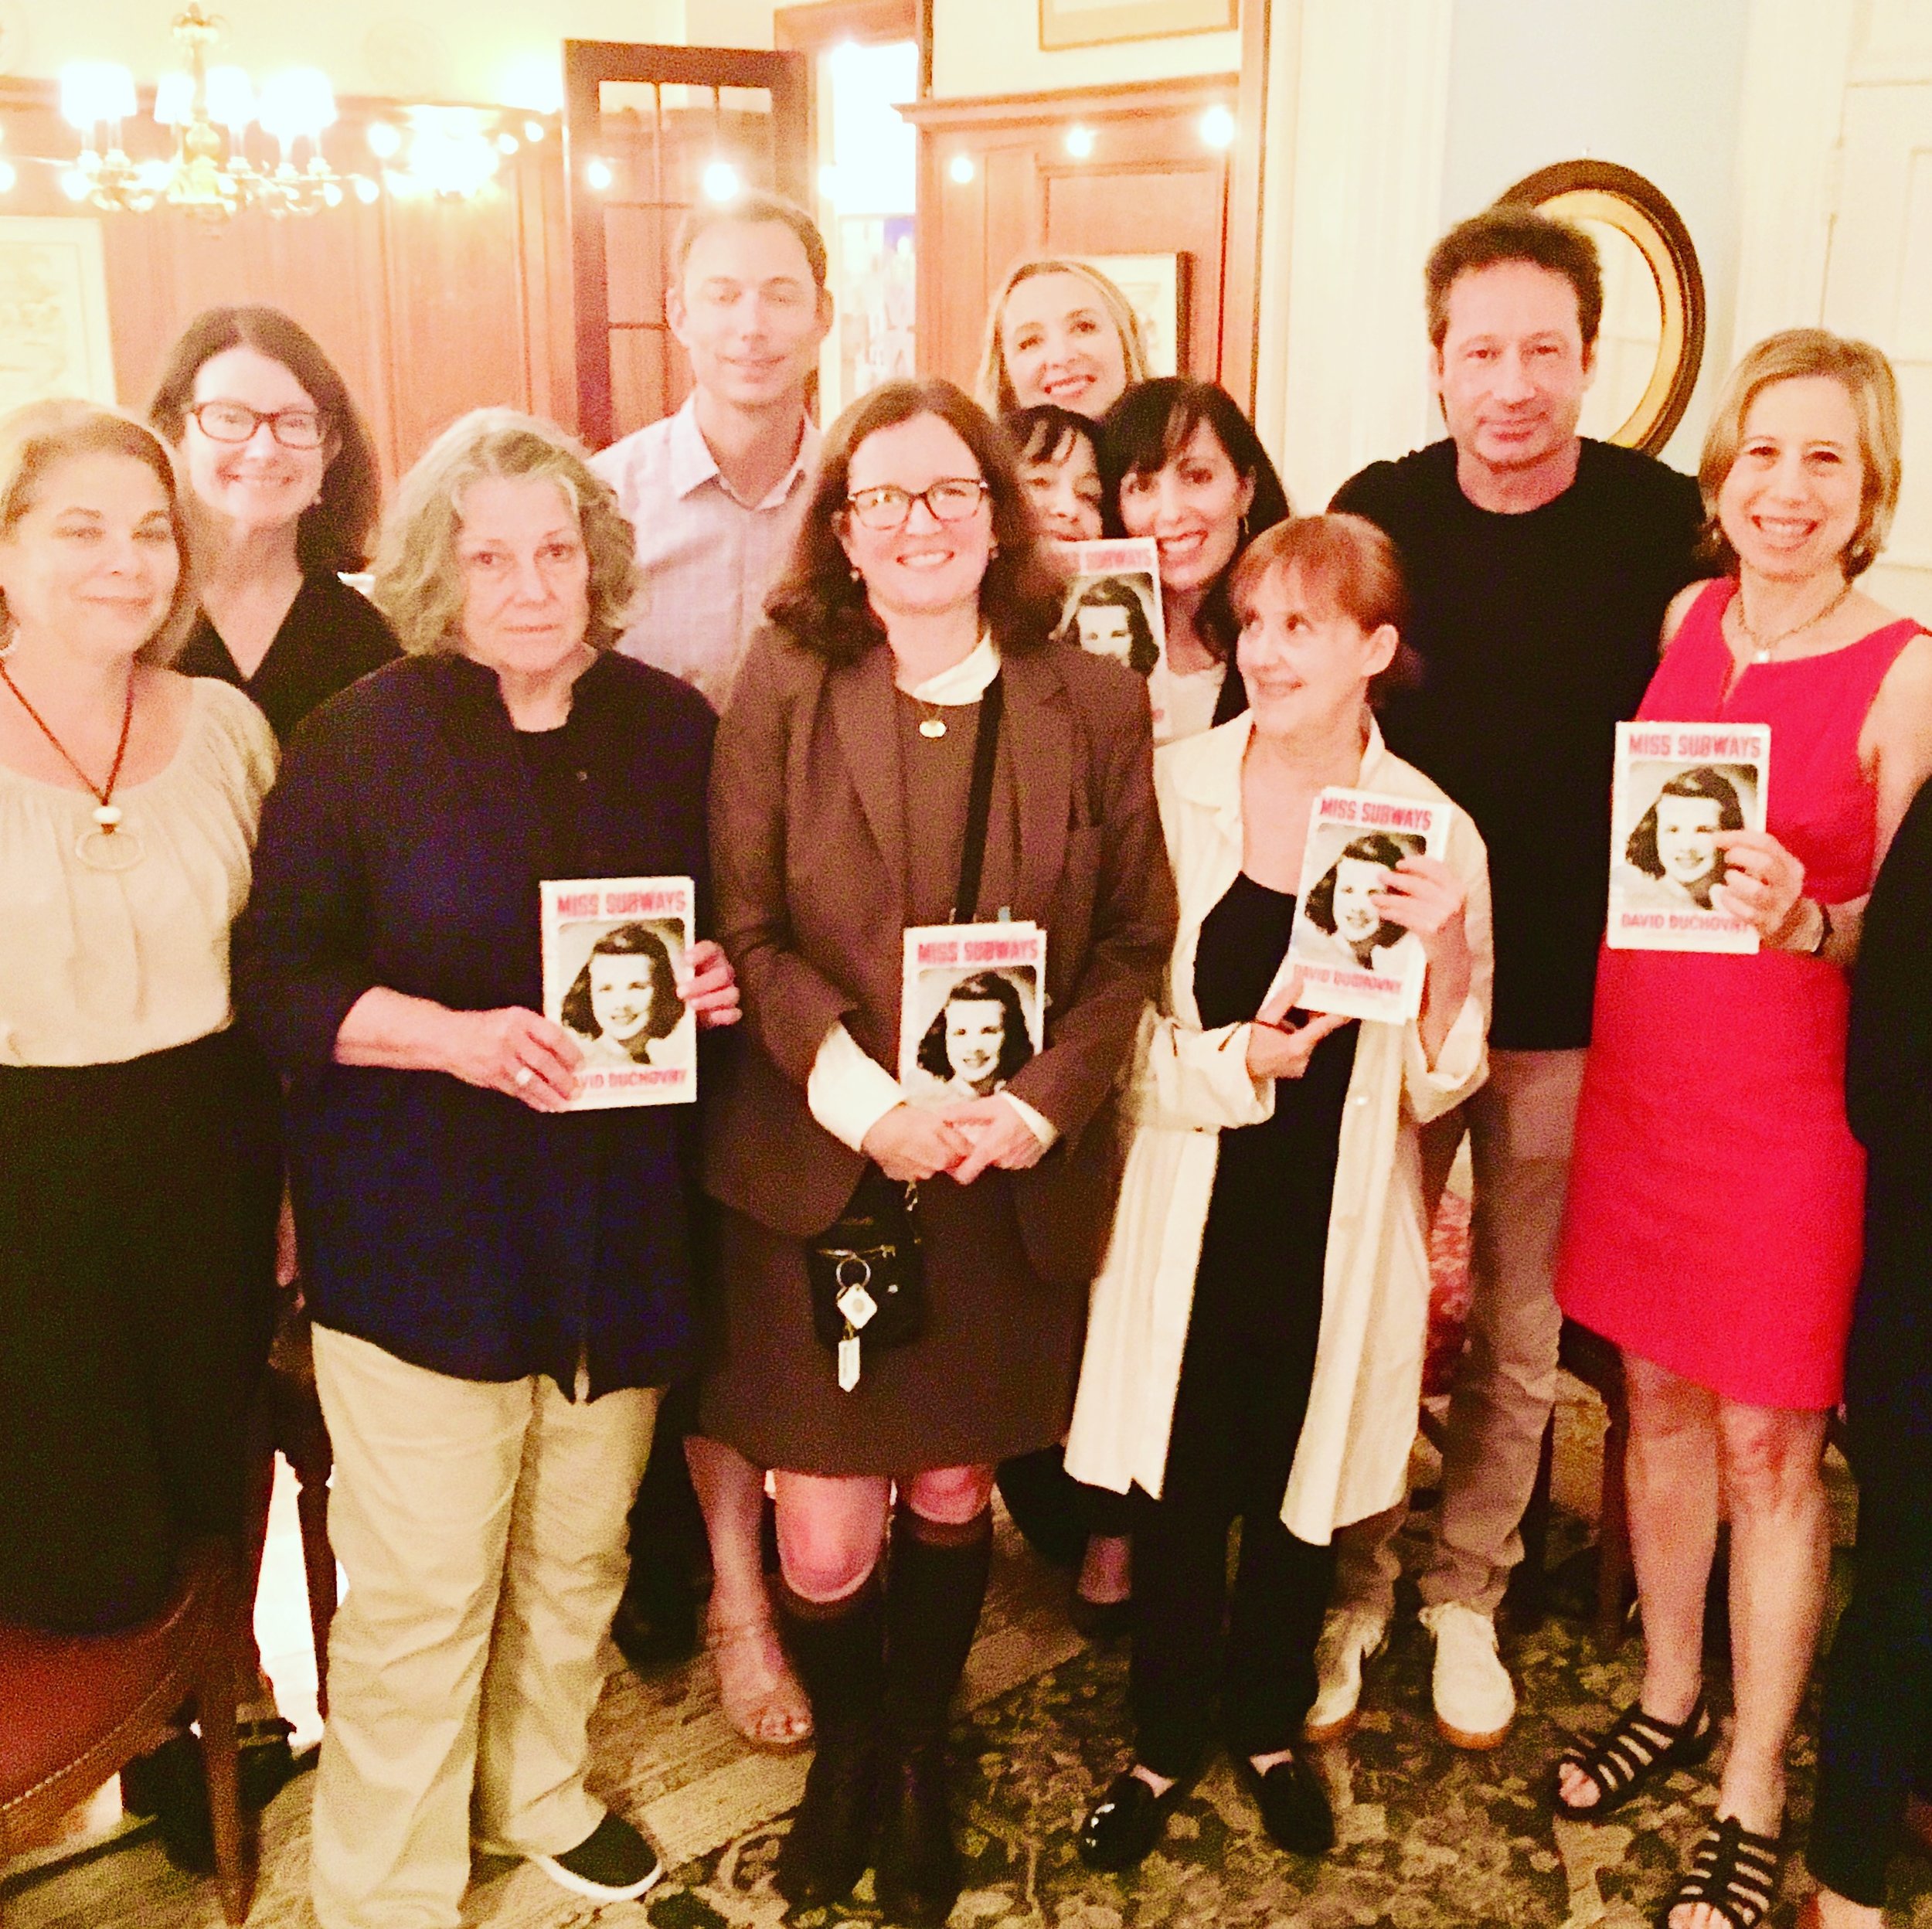 David Duchovny at his Pop-Up Book Group for MISS SUBWAYS.